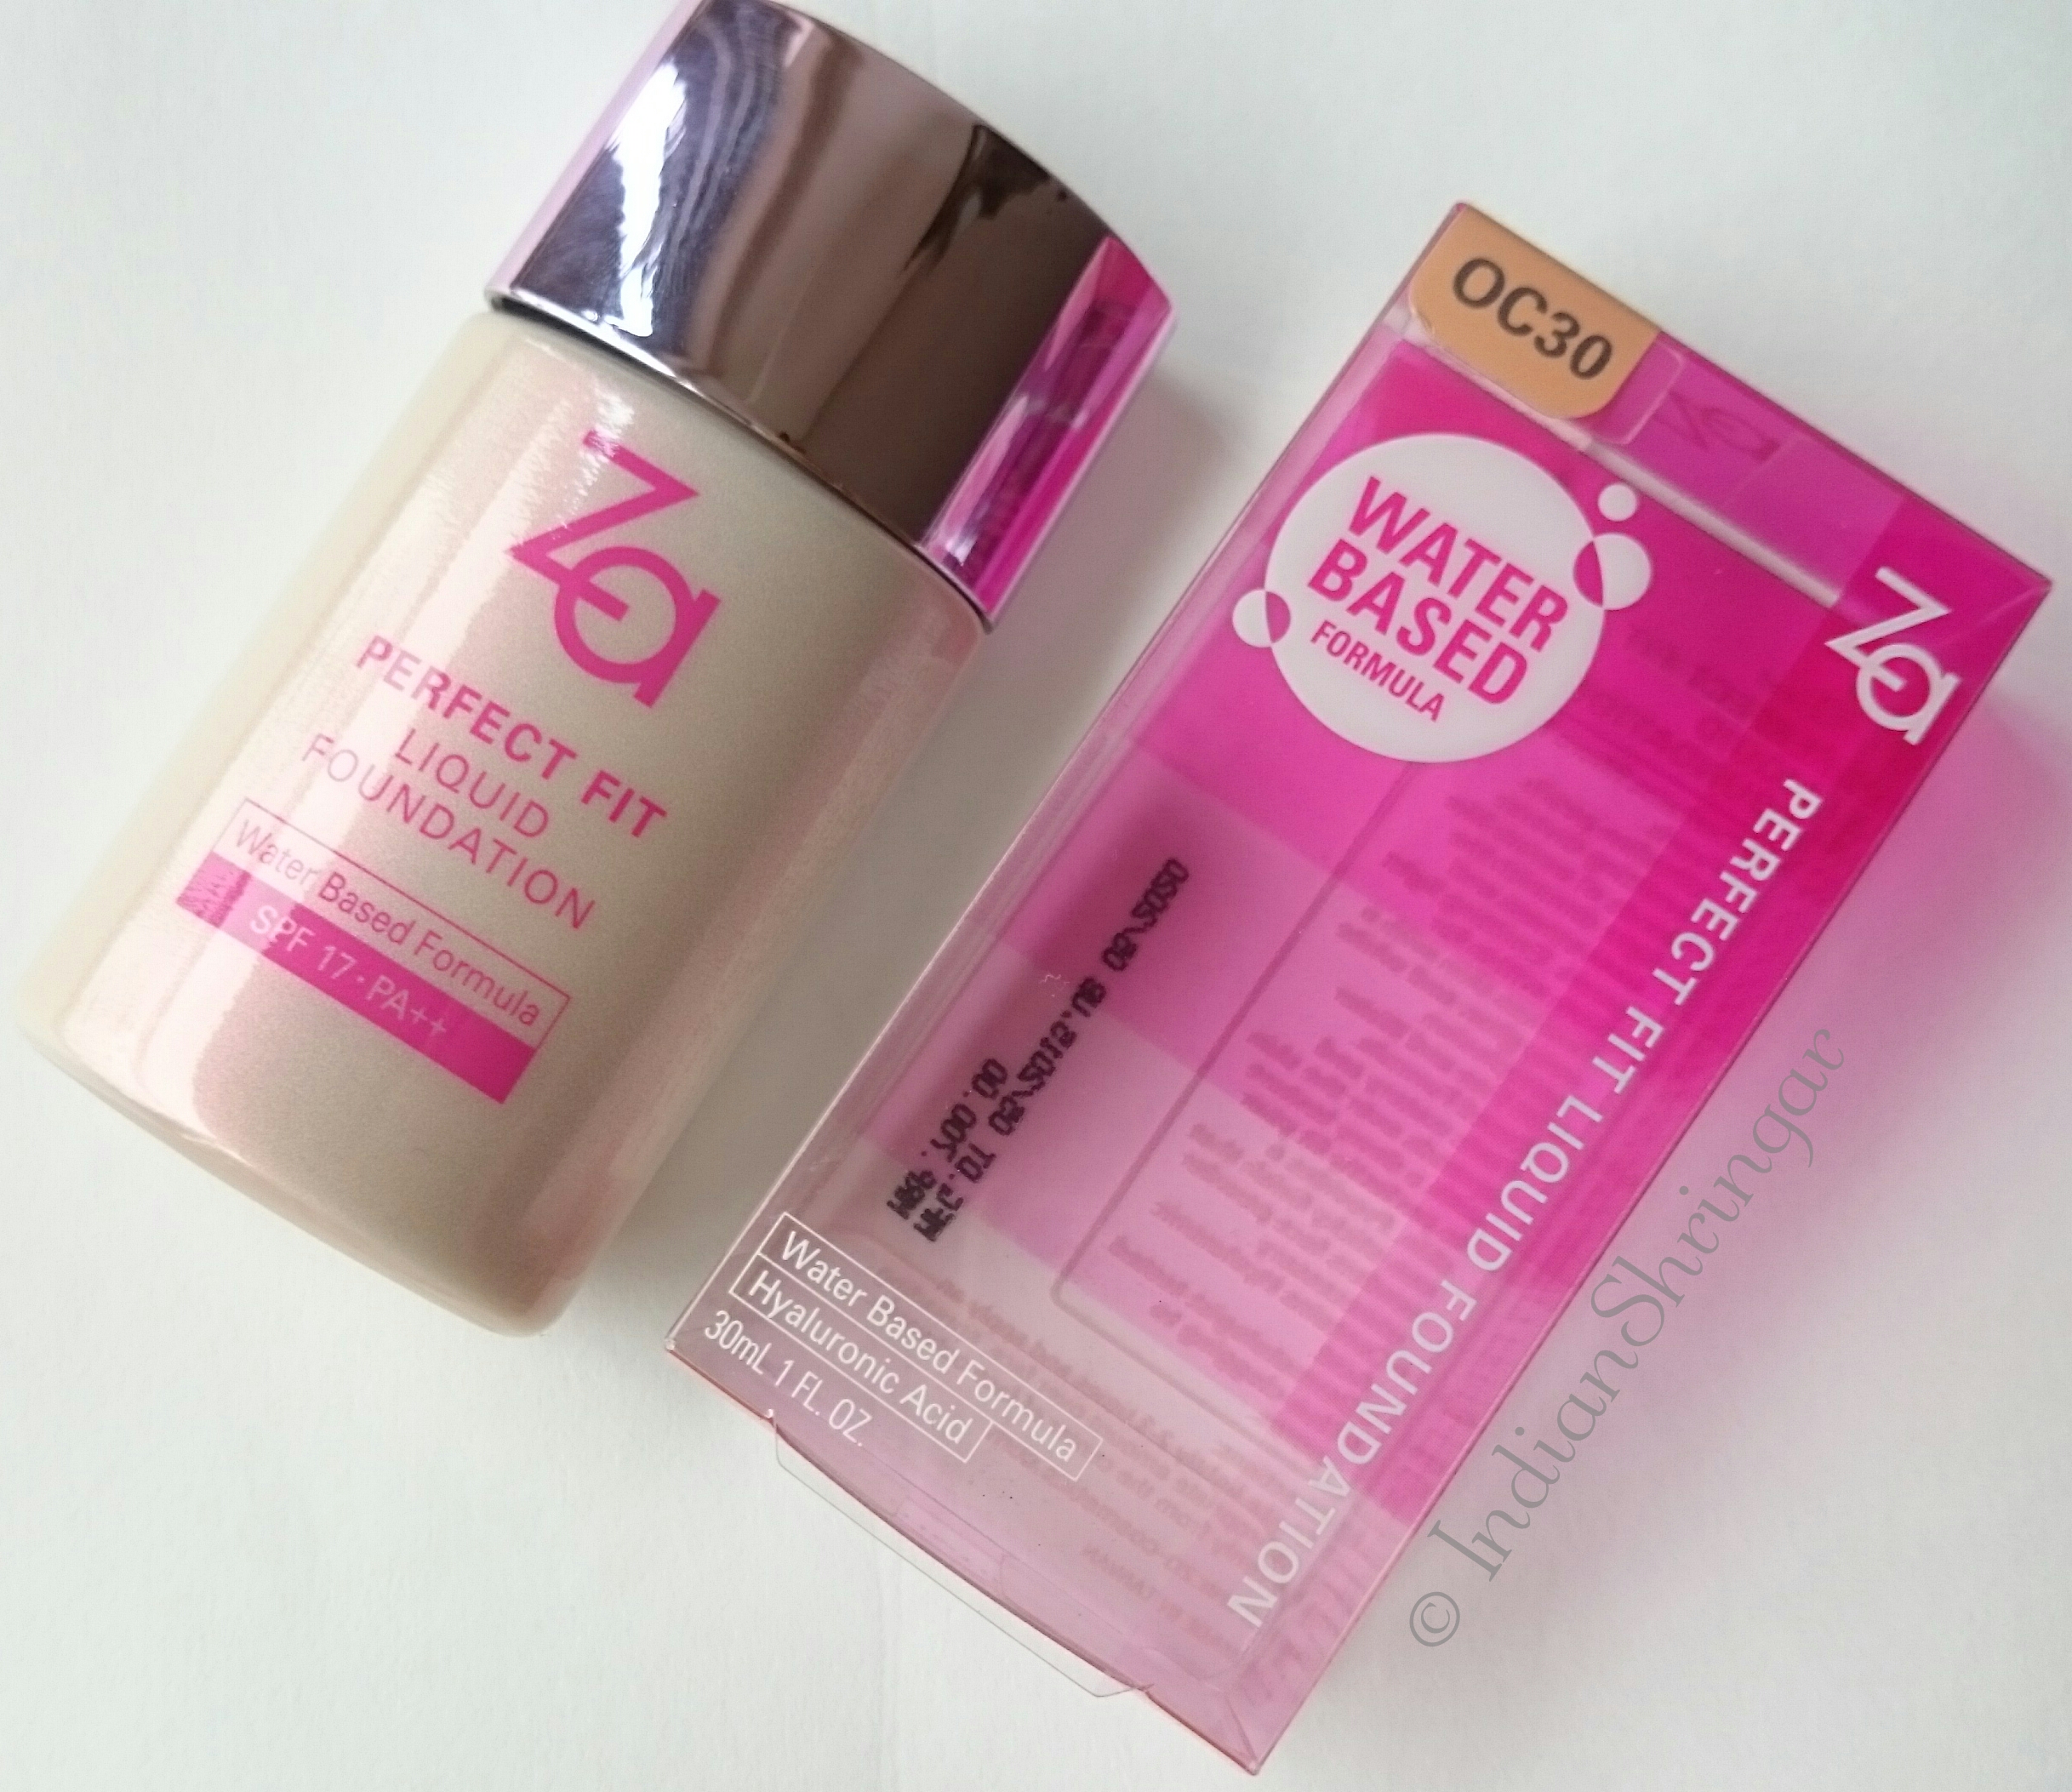 Za Perfect Fit Liquid Foundation OC30 - Review and swatch